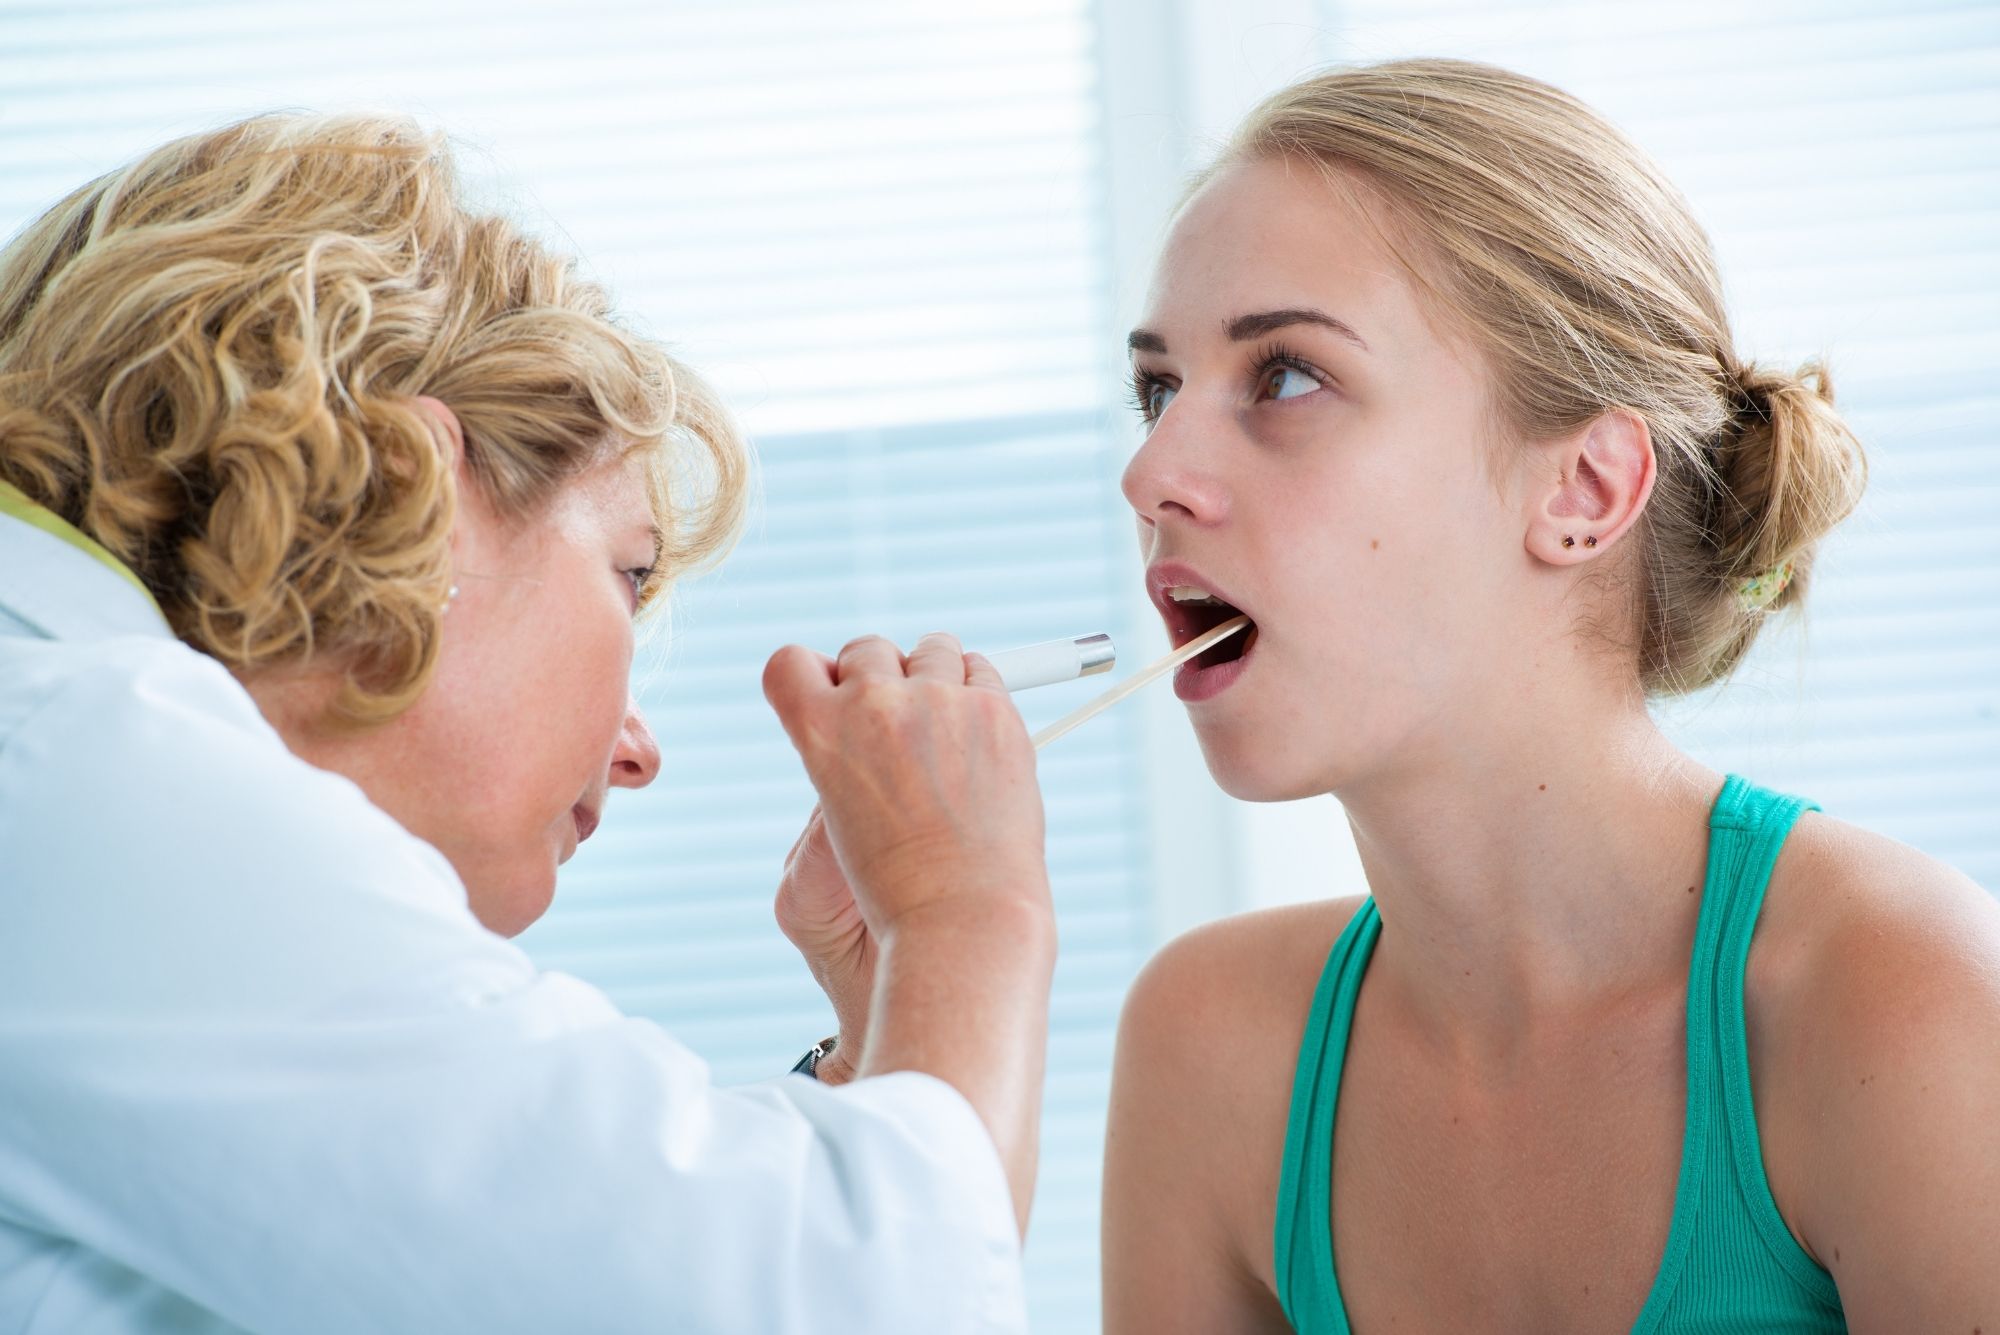 An ENT doctor examines a patient's throat for tonsillectomy complications.